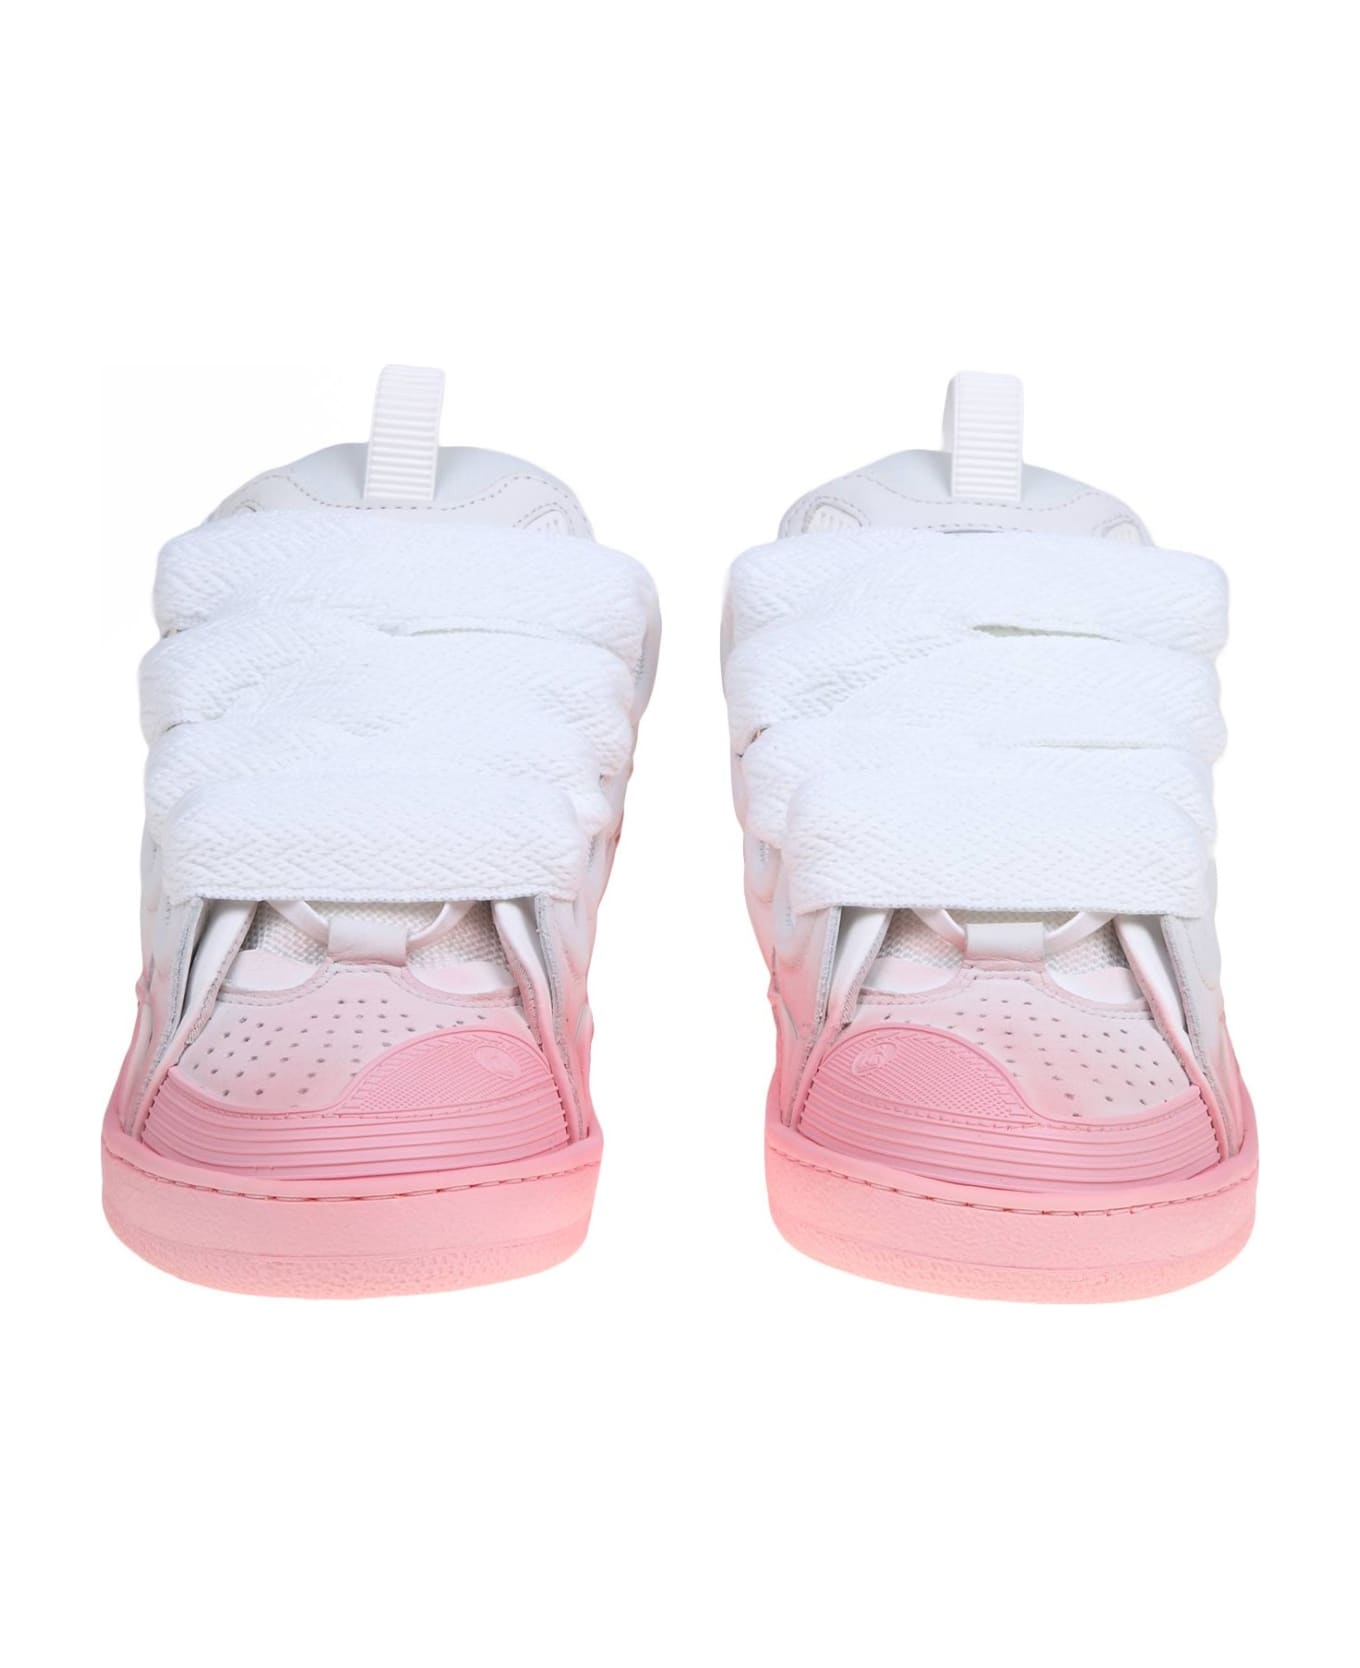 Lanvin Curb Sneakers In White And Pink Leather - Pink